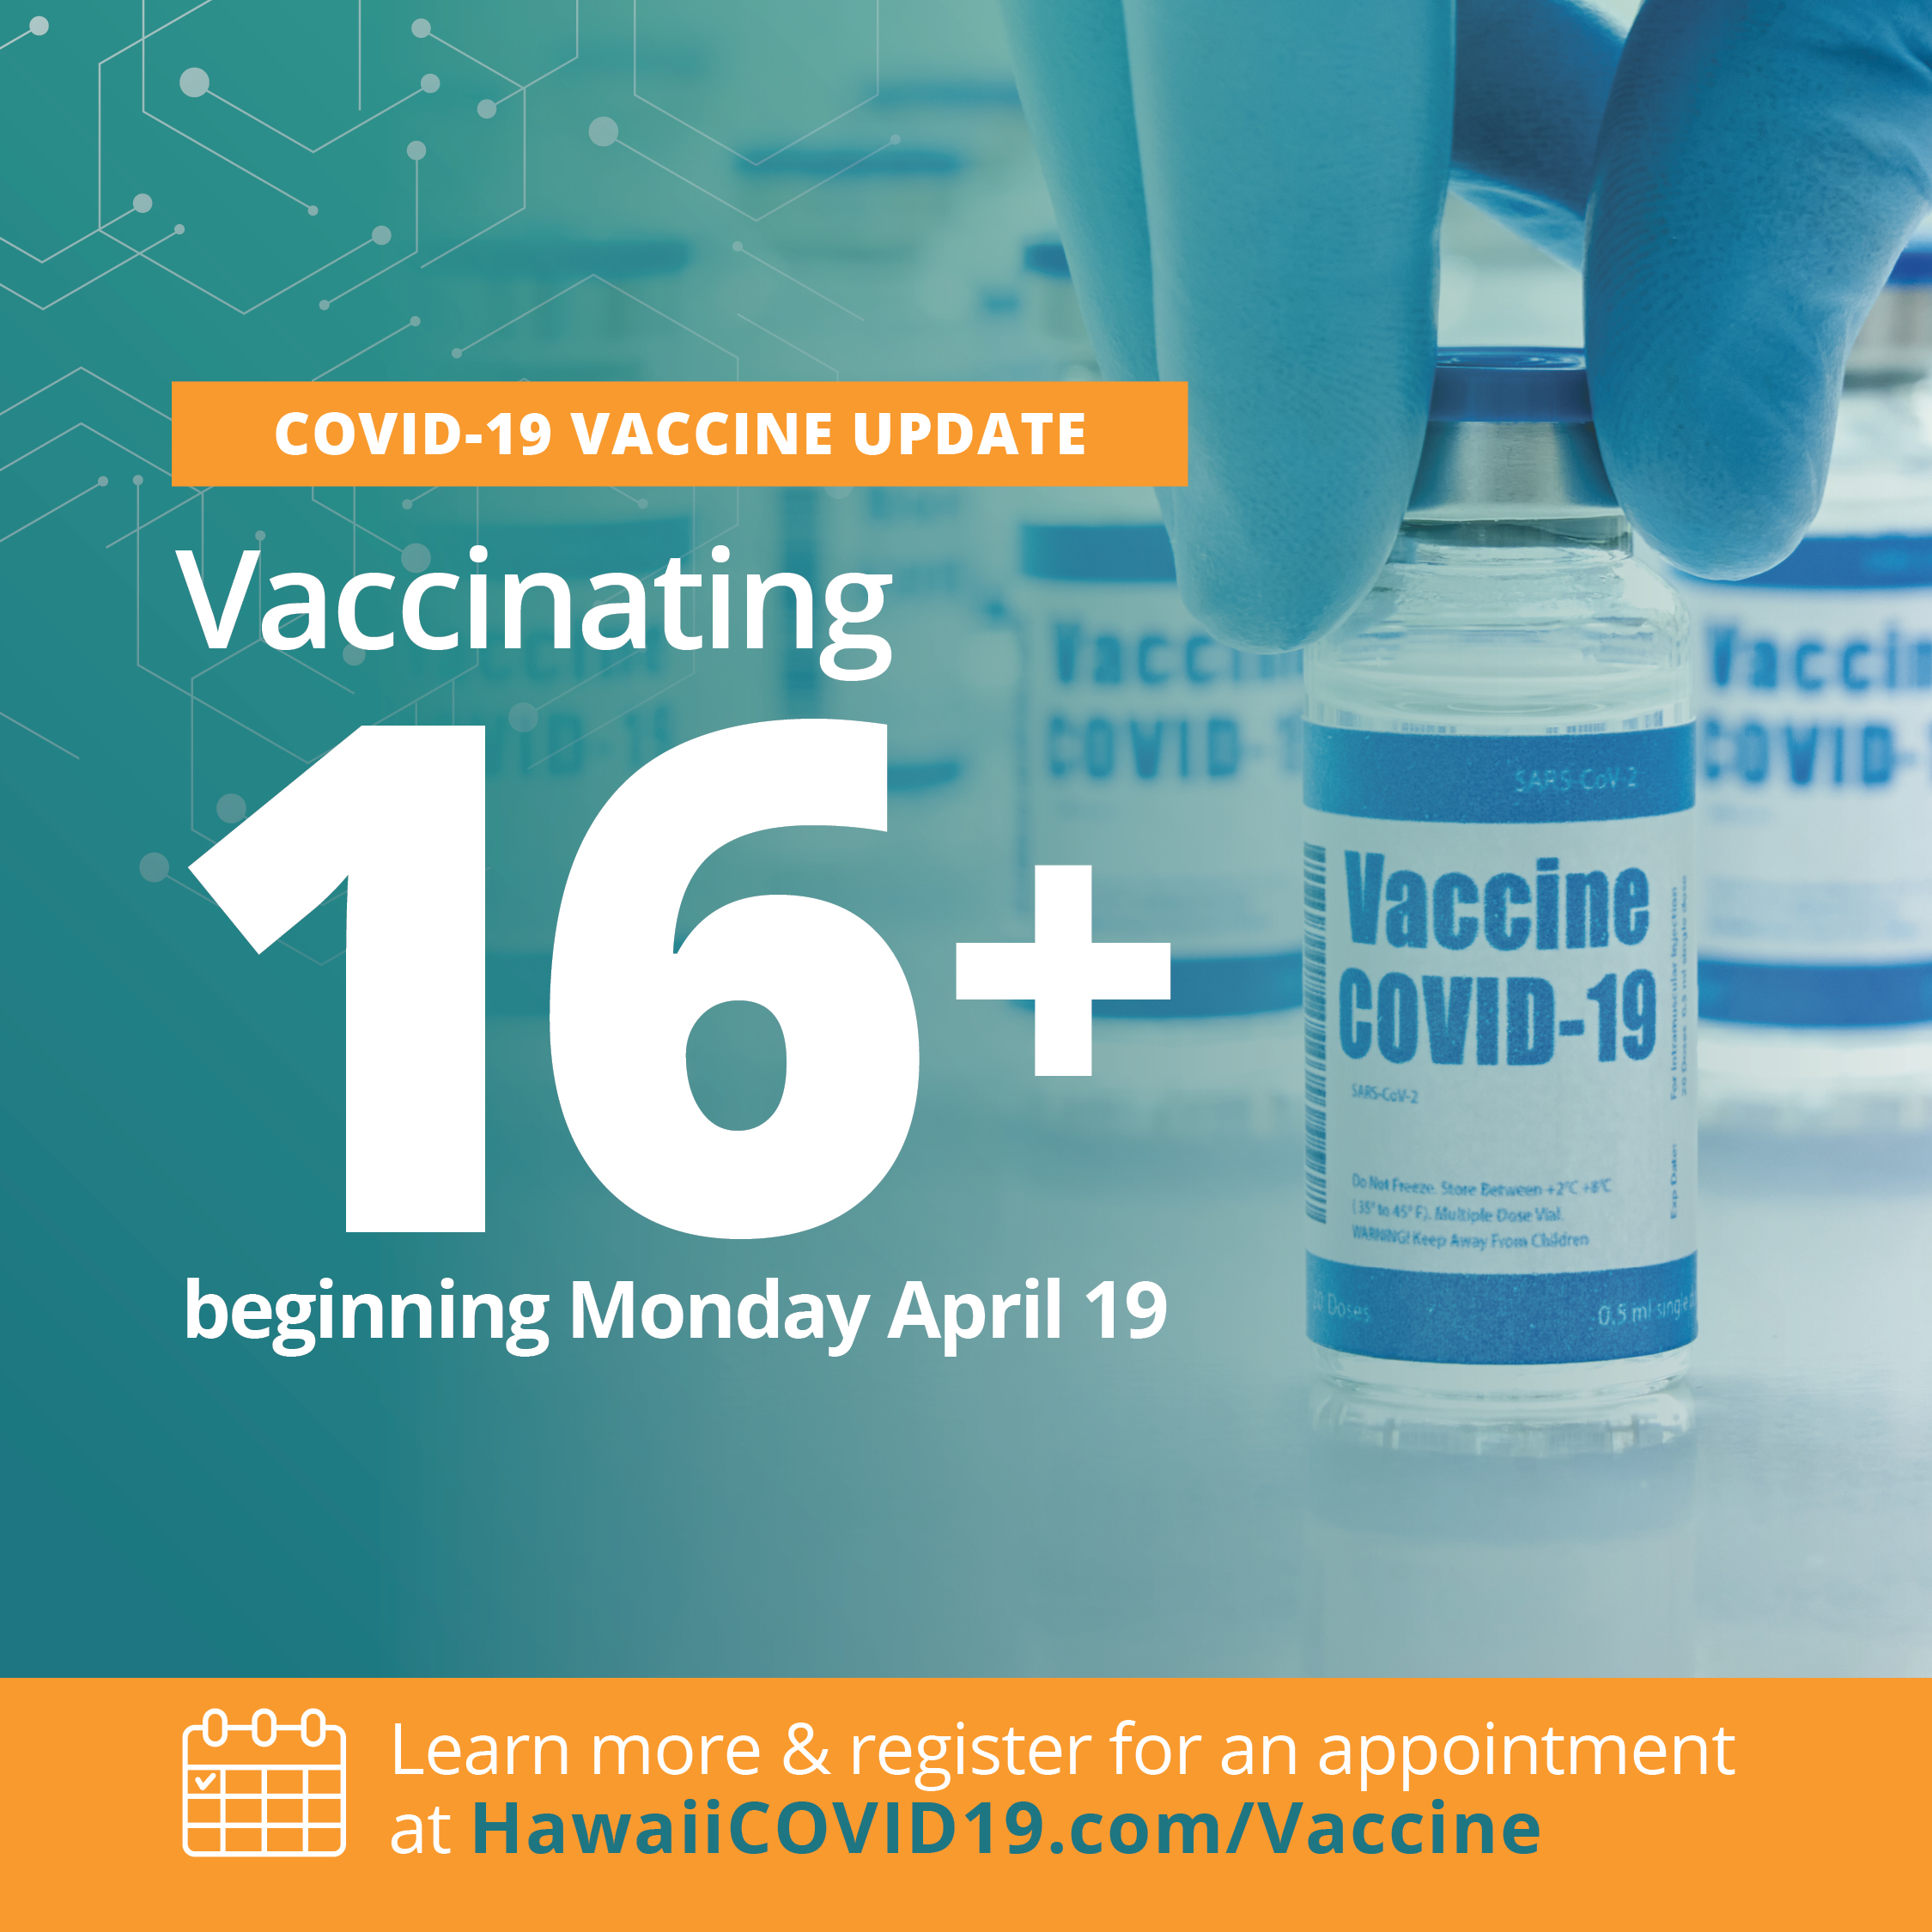 vaccinations now available for residents 16 and older